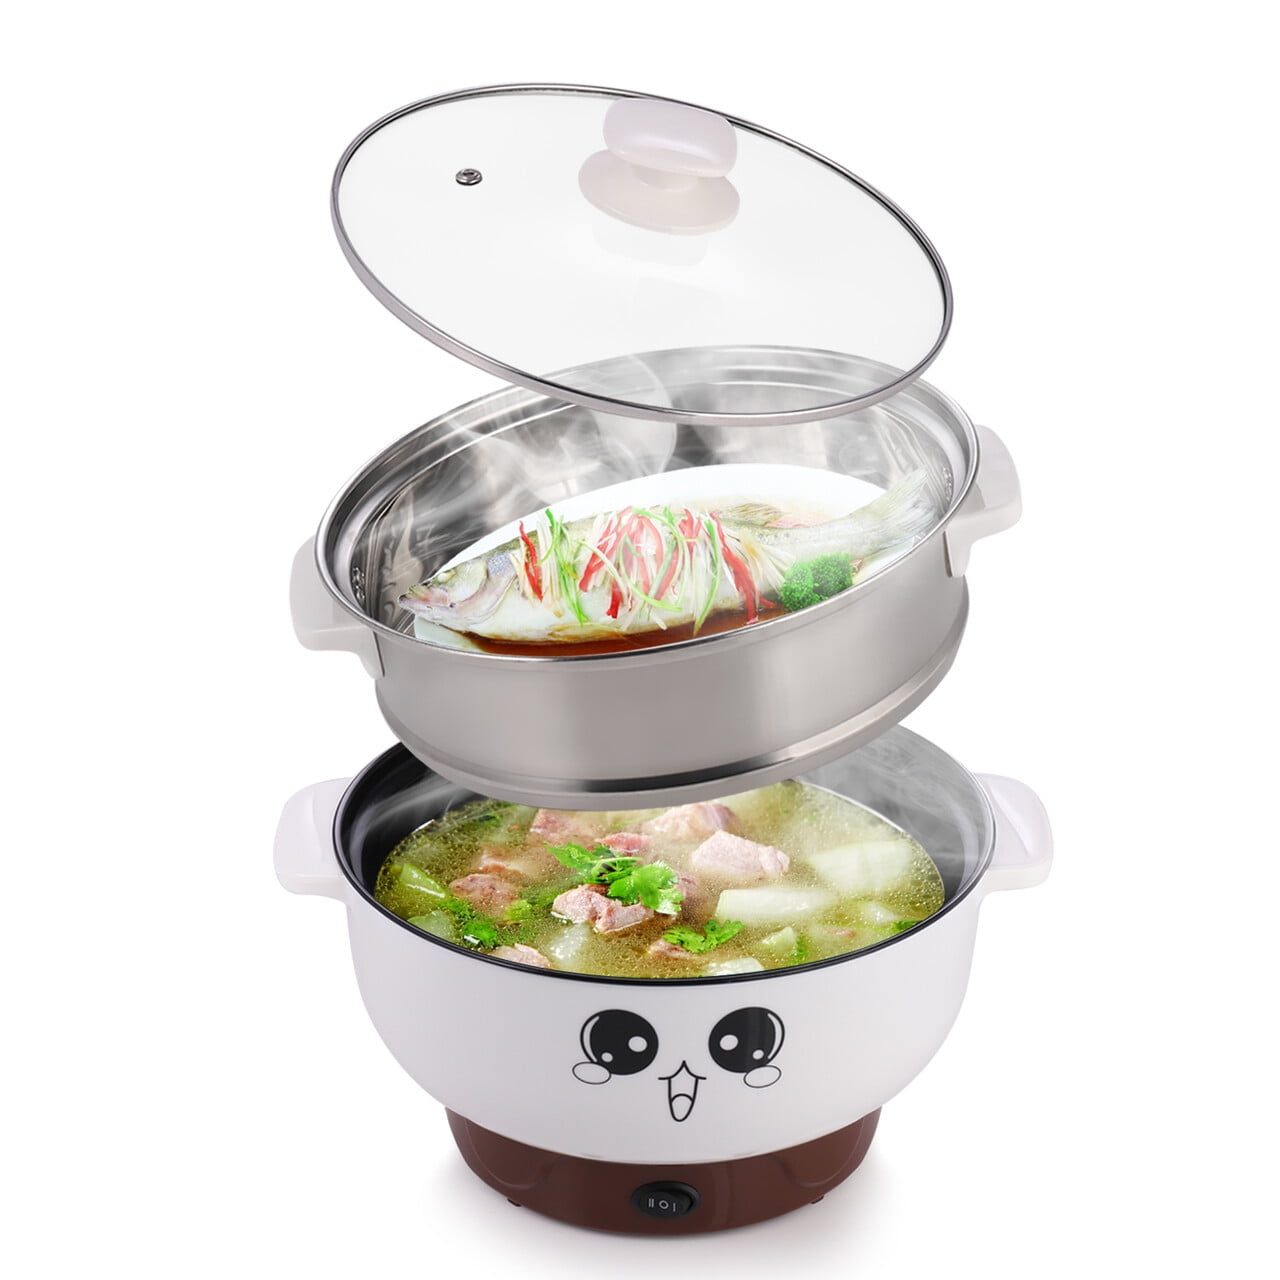 Multifunction Electric Skillet Wok Rice Cooker Steamer Small Nonstick with Lid 